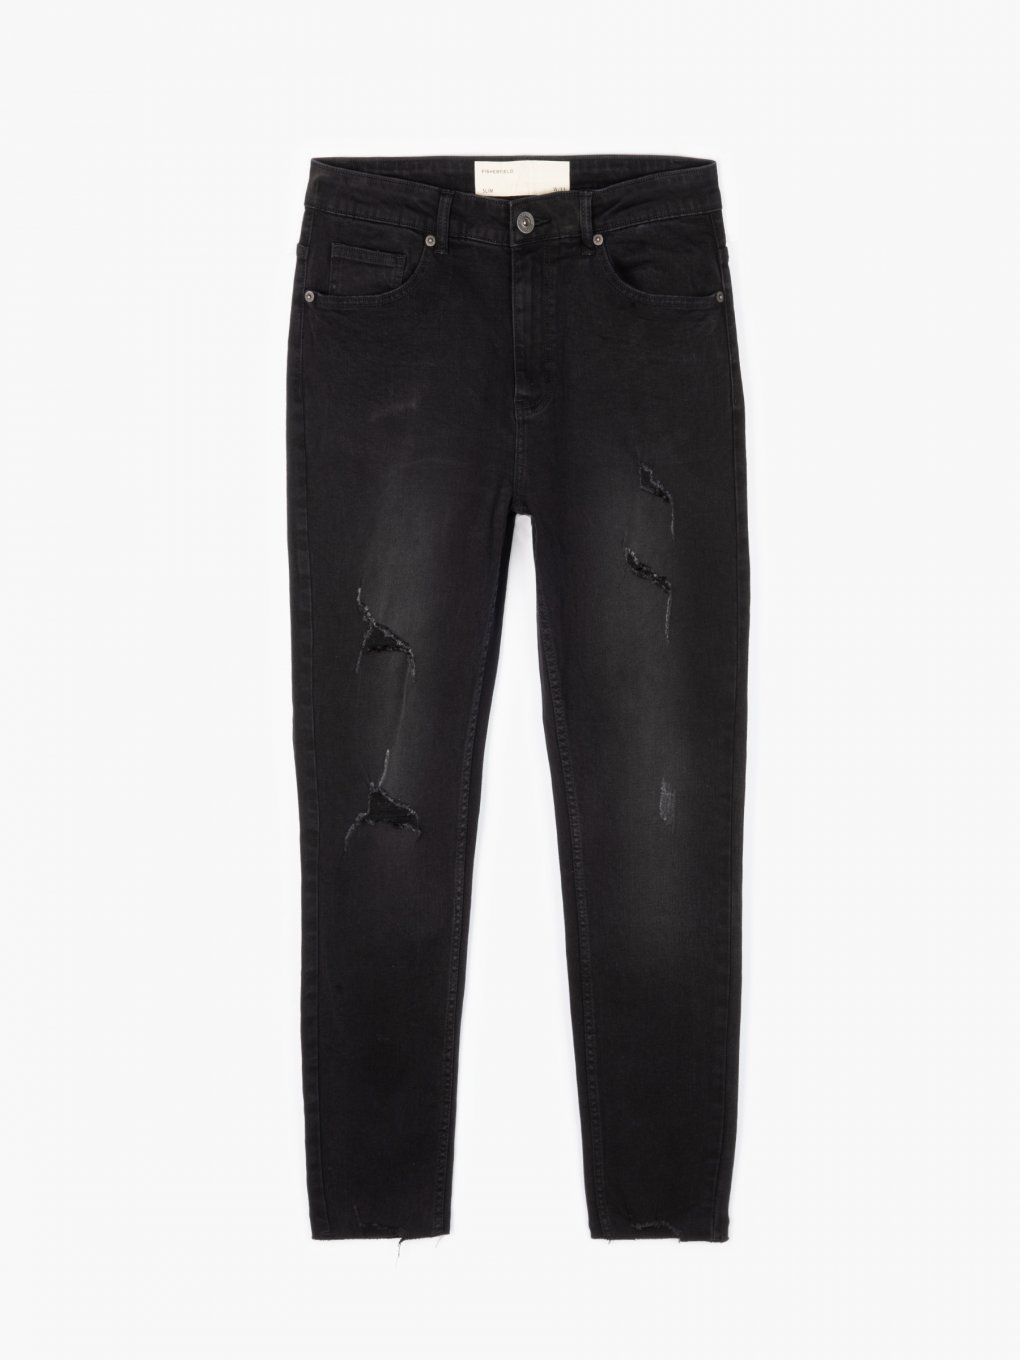 Slim fit jeans with raw hems